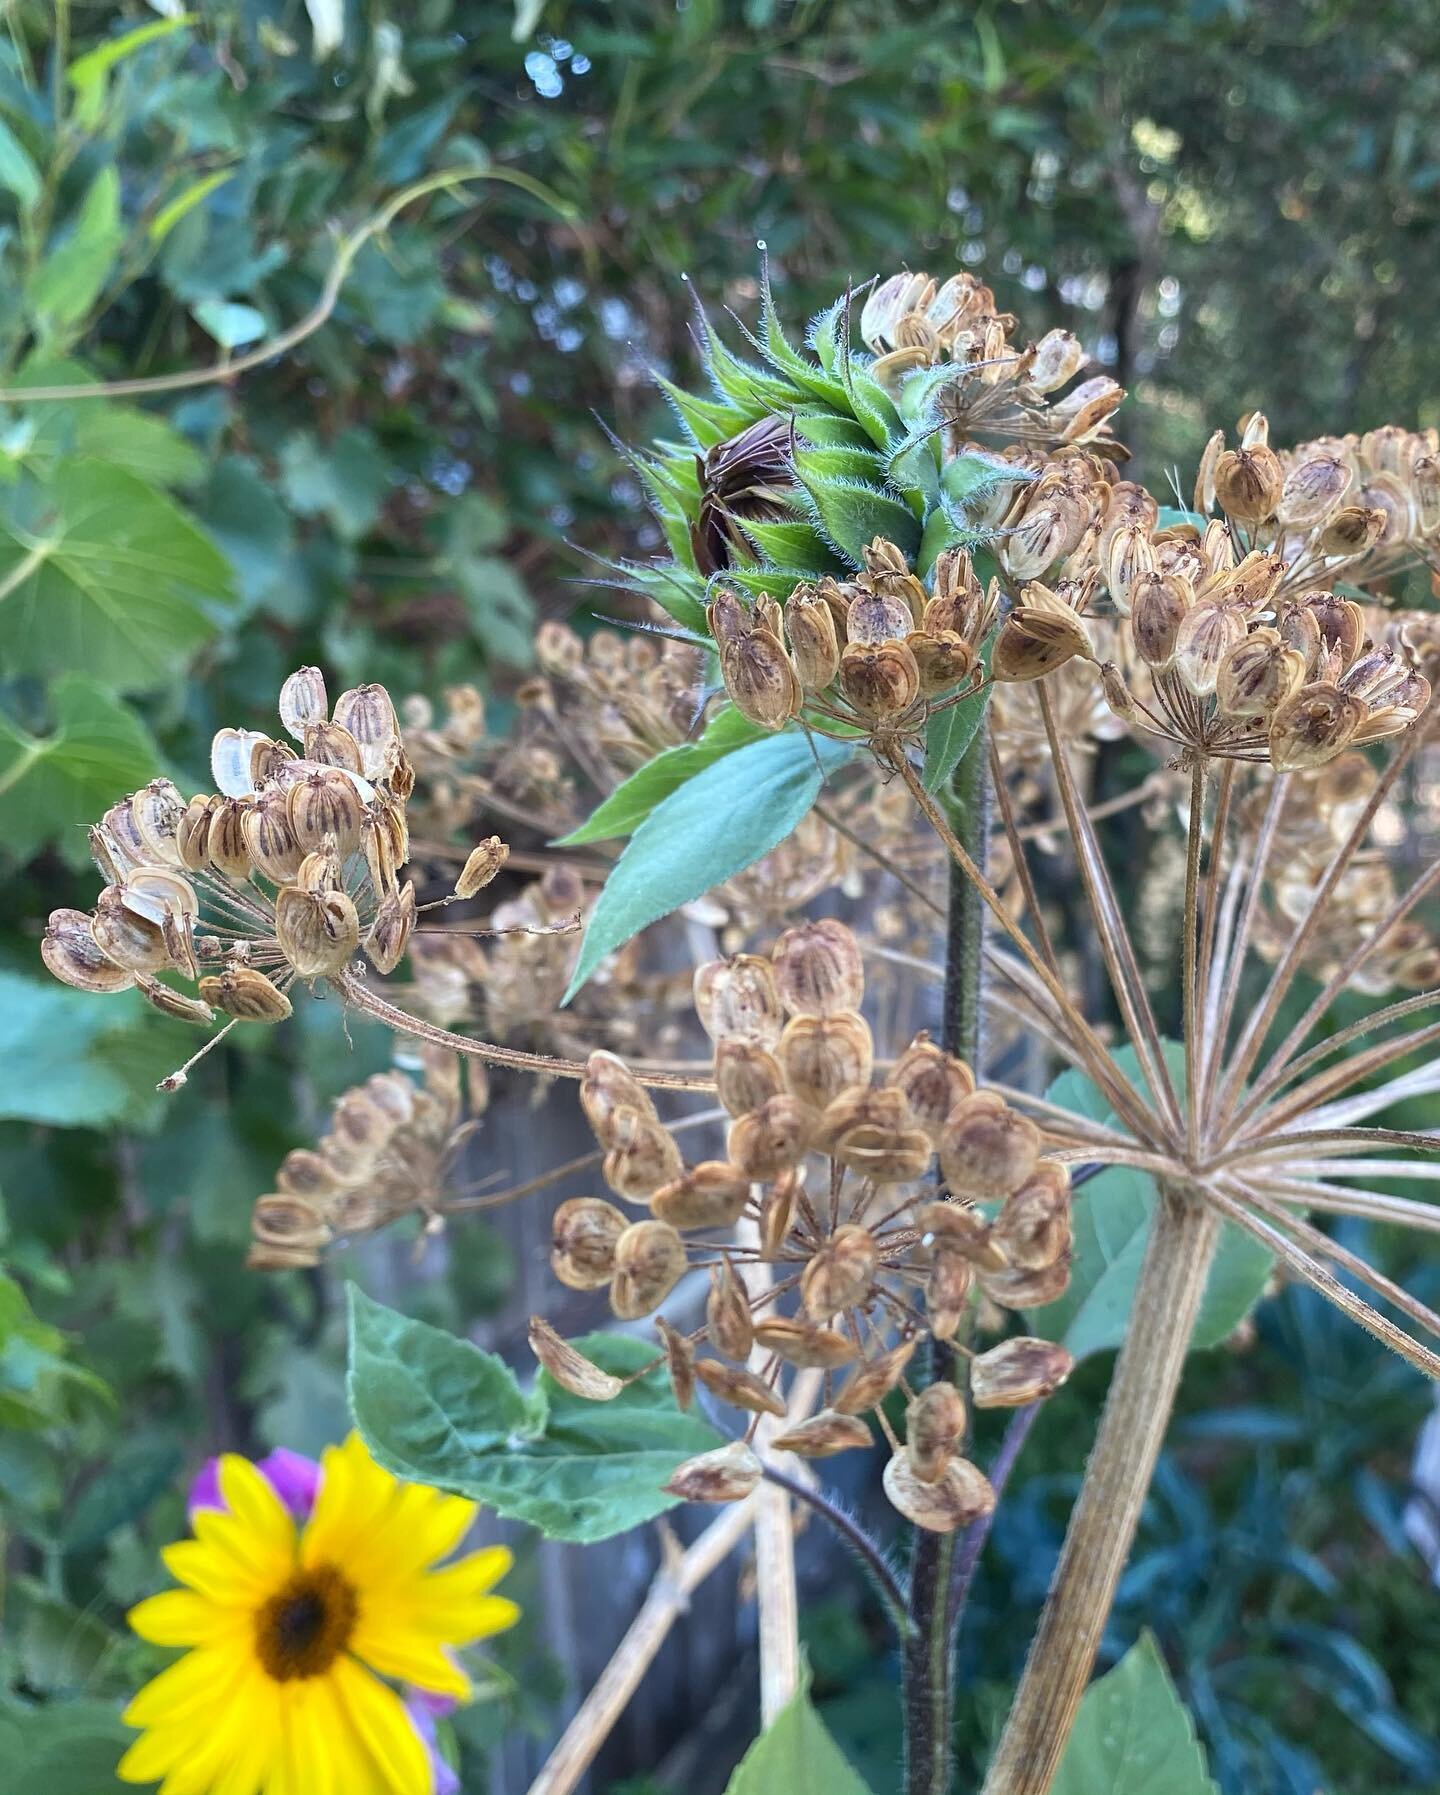 Heracleum structural superstar in senescence (1/2): dried stalks and star-burst seedheads lending support to sunflowers emerging into a maturing summer. 
⁣
Southern outpost of #heracleumappreciationsociety reporting in.
⁣
#heracleum #heracleumlanatum